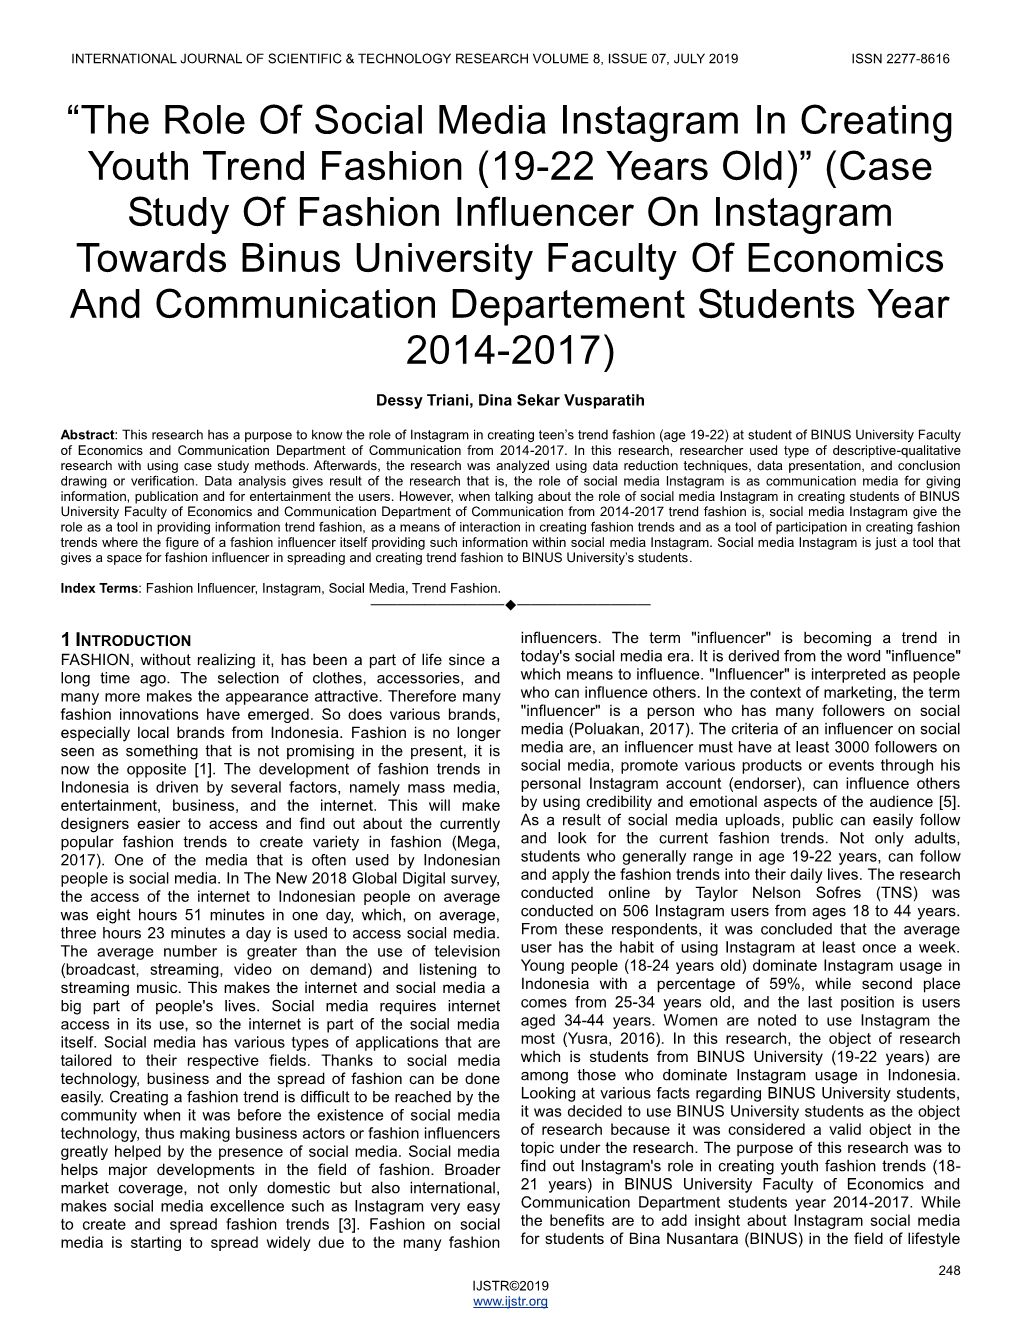 The Role of Social Media Instagram in Creating Youth Trend Fashion (19